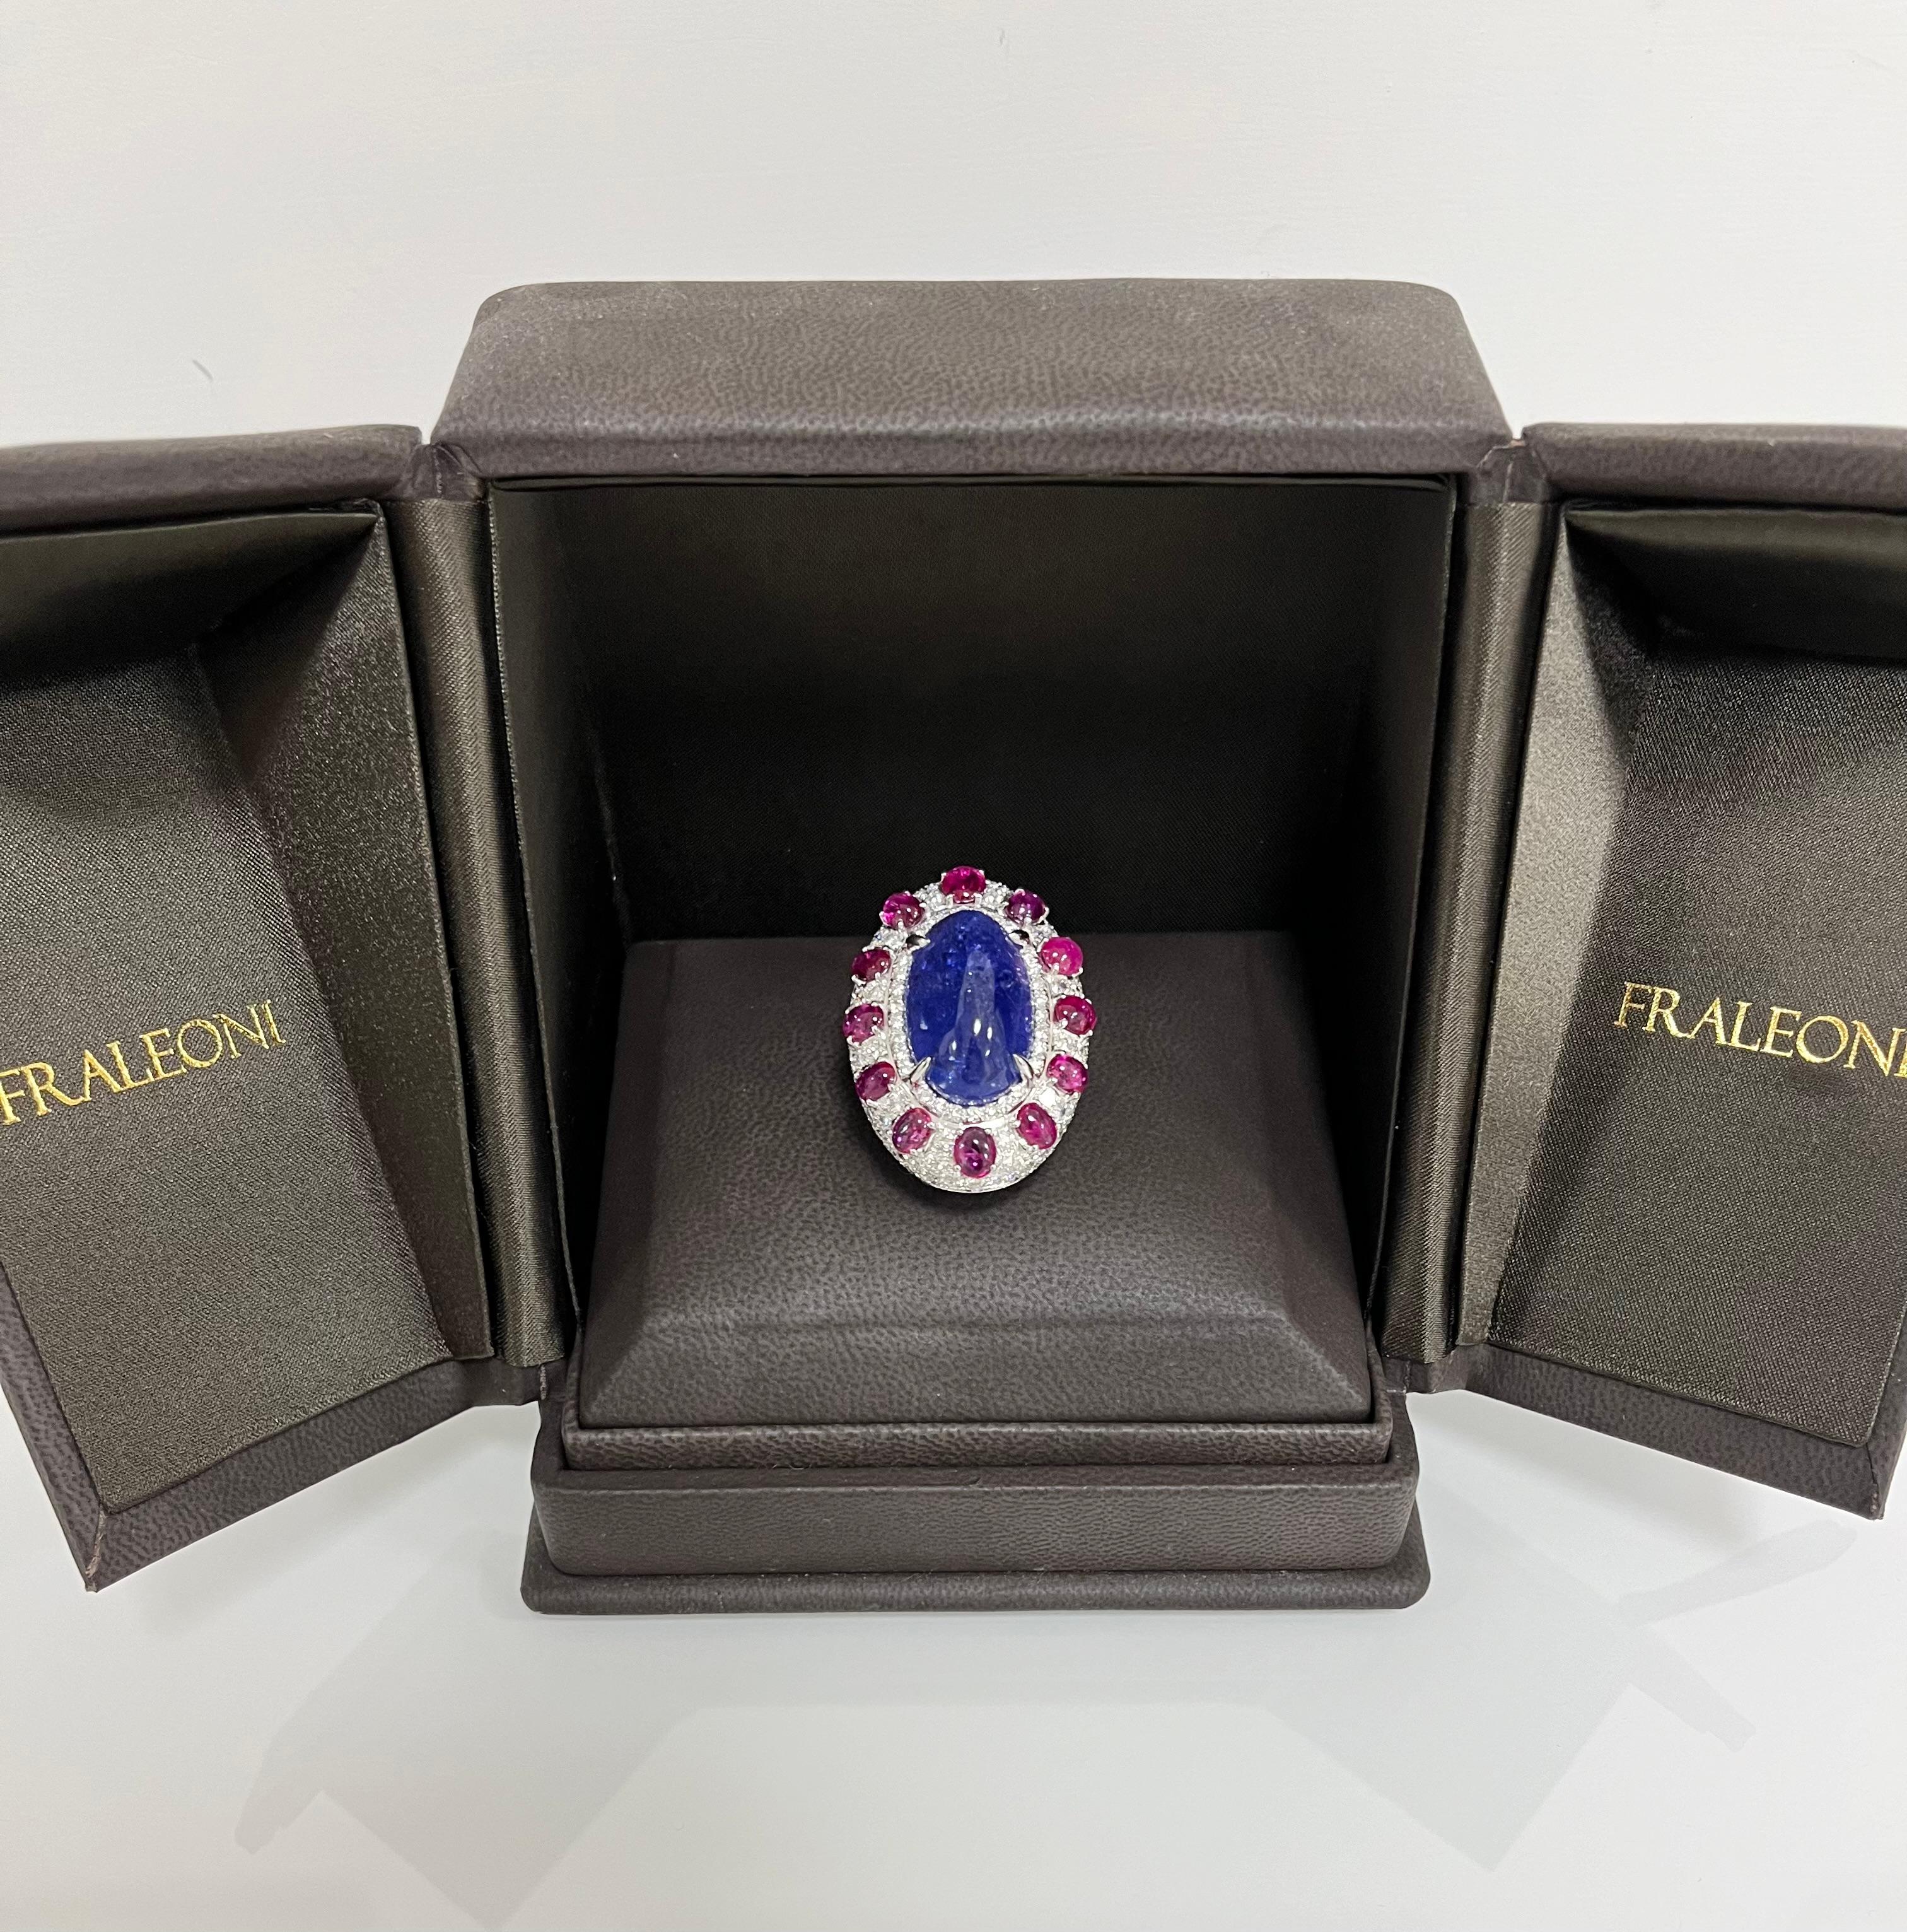 Fraleoni 18 Kt. White Gold Diamond Ruby Tanzanite Cocktail Ring In New Condition For Sale In Rome, IT